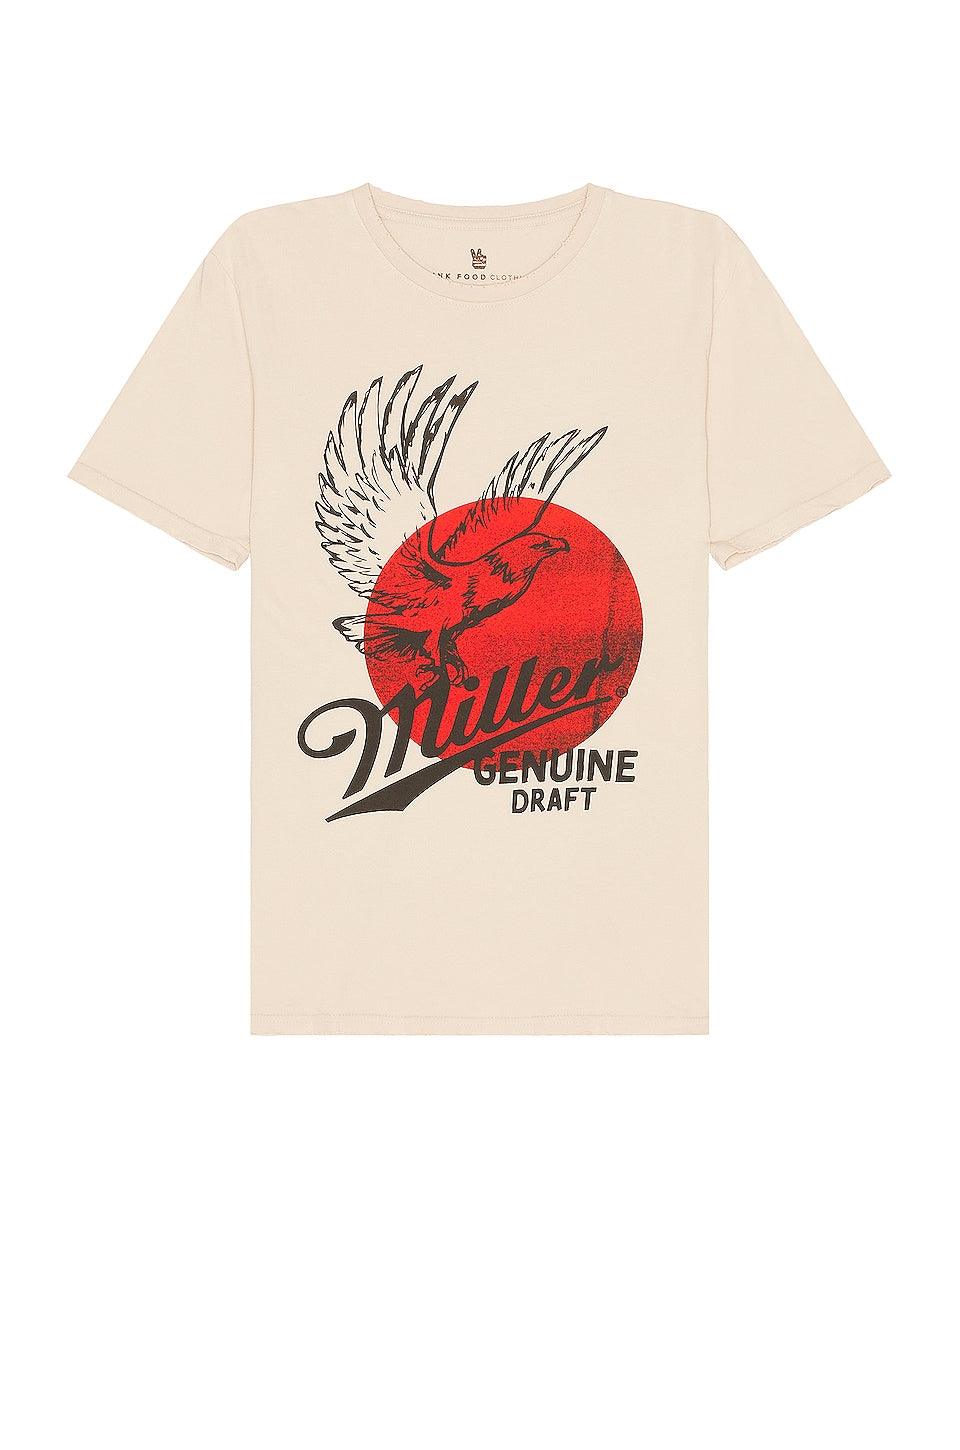 Miller Genuine Draft T-Shirt - Purpose-Built / Home of the Trades